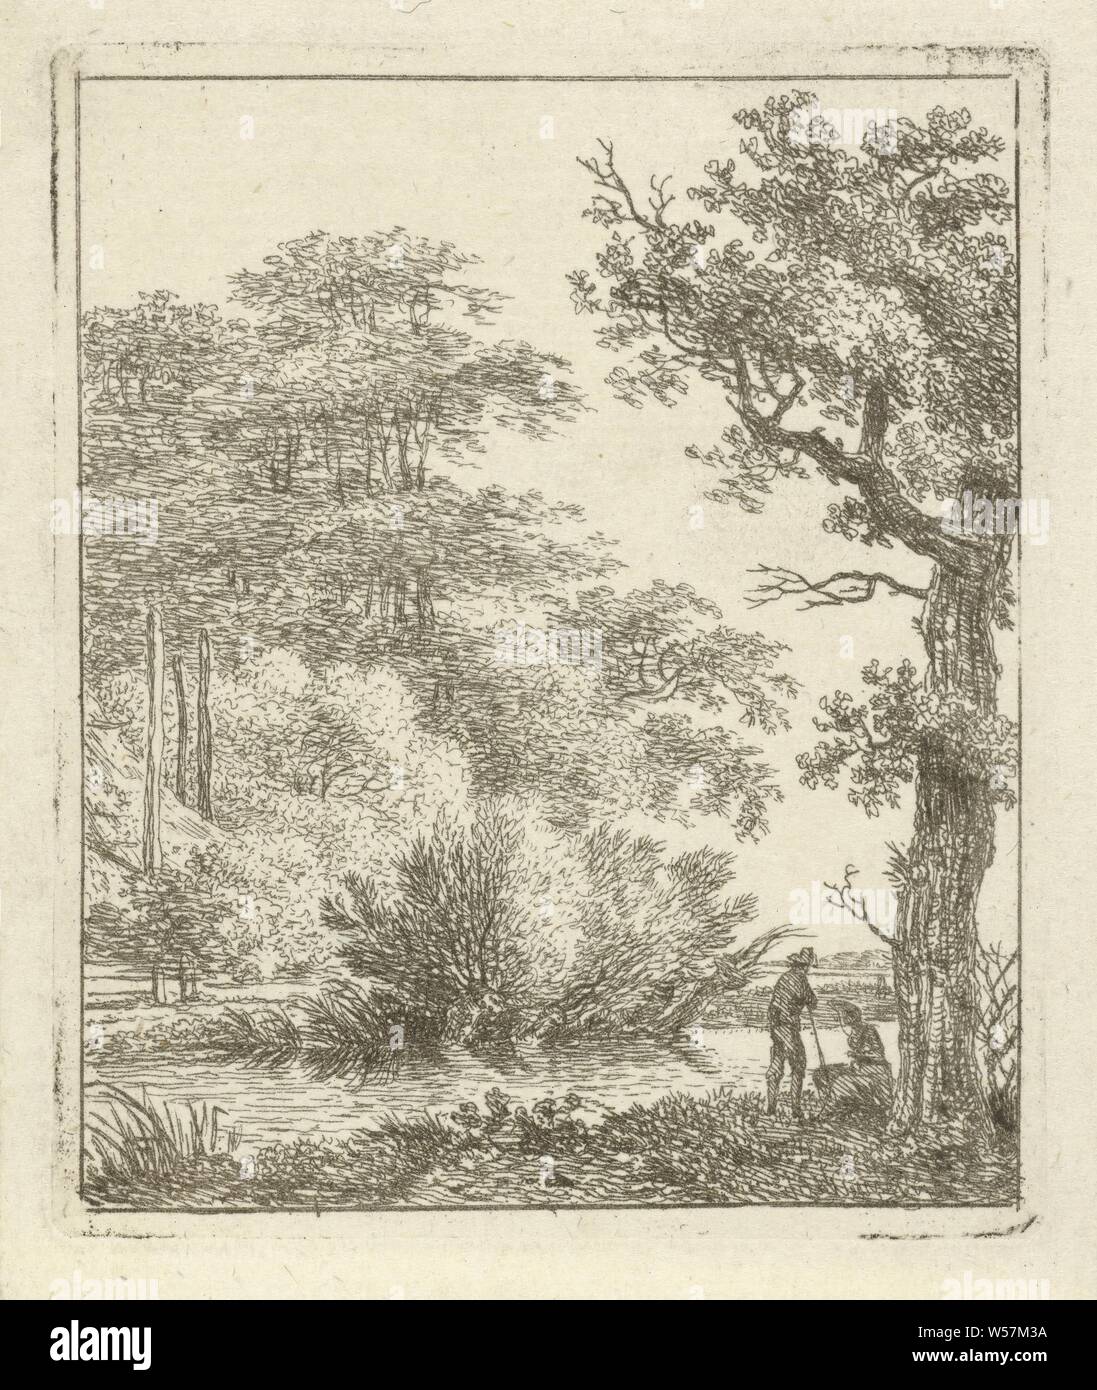 Two Persons At A Stream Landscape With Tall Trees And On The Bank